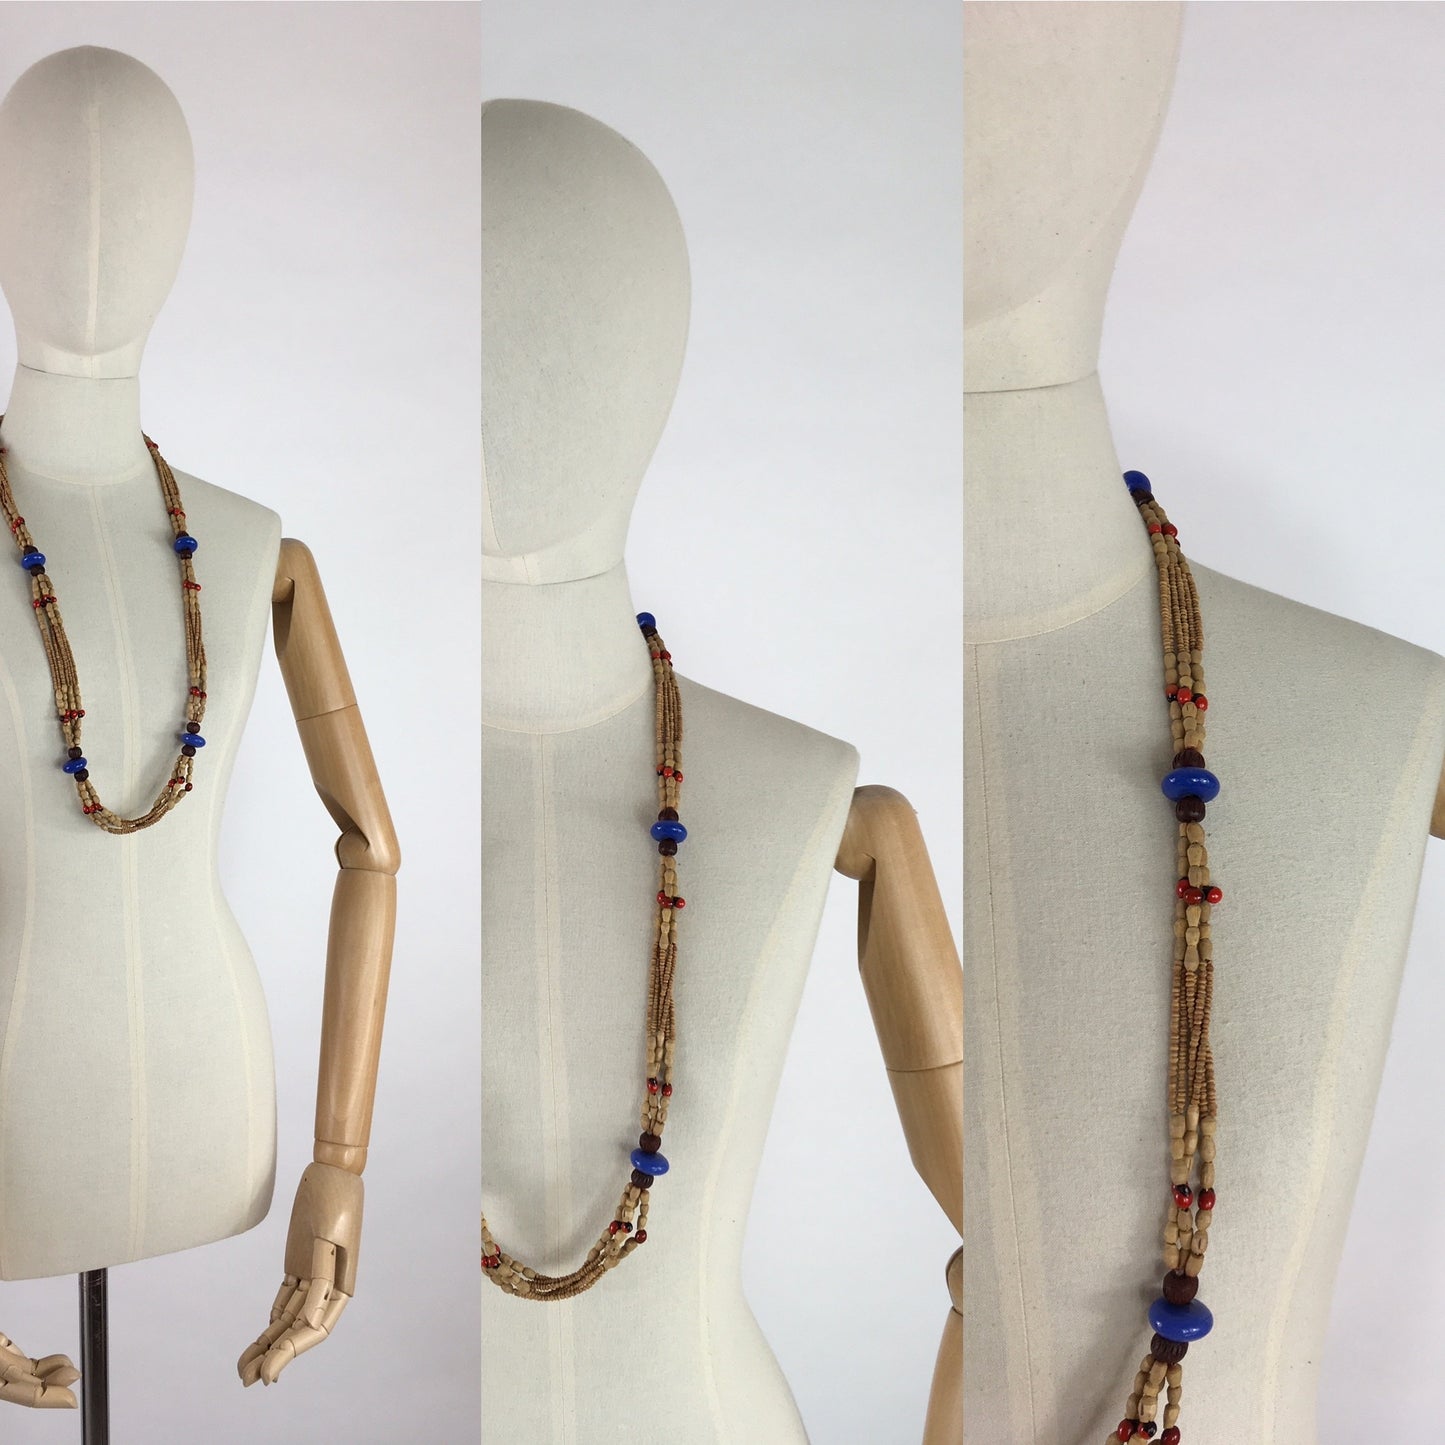 Original 1930s Multistrand Necklace - In Contrasting Wooden and Glass Beads